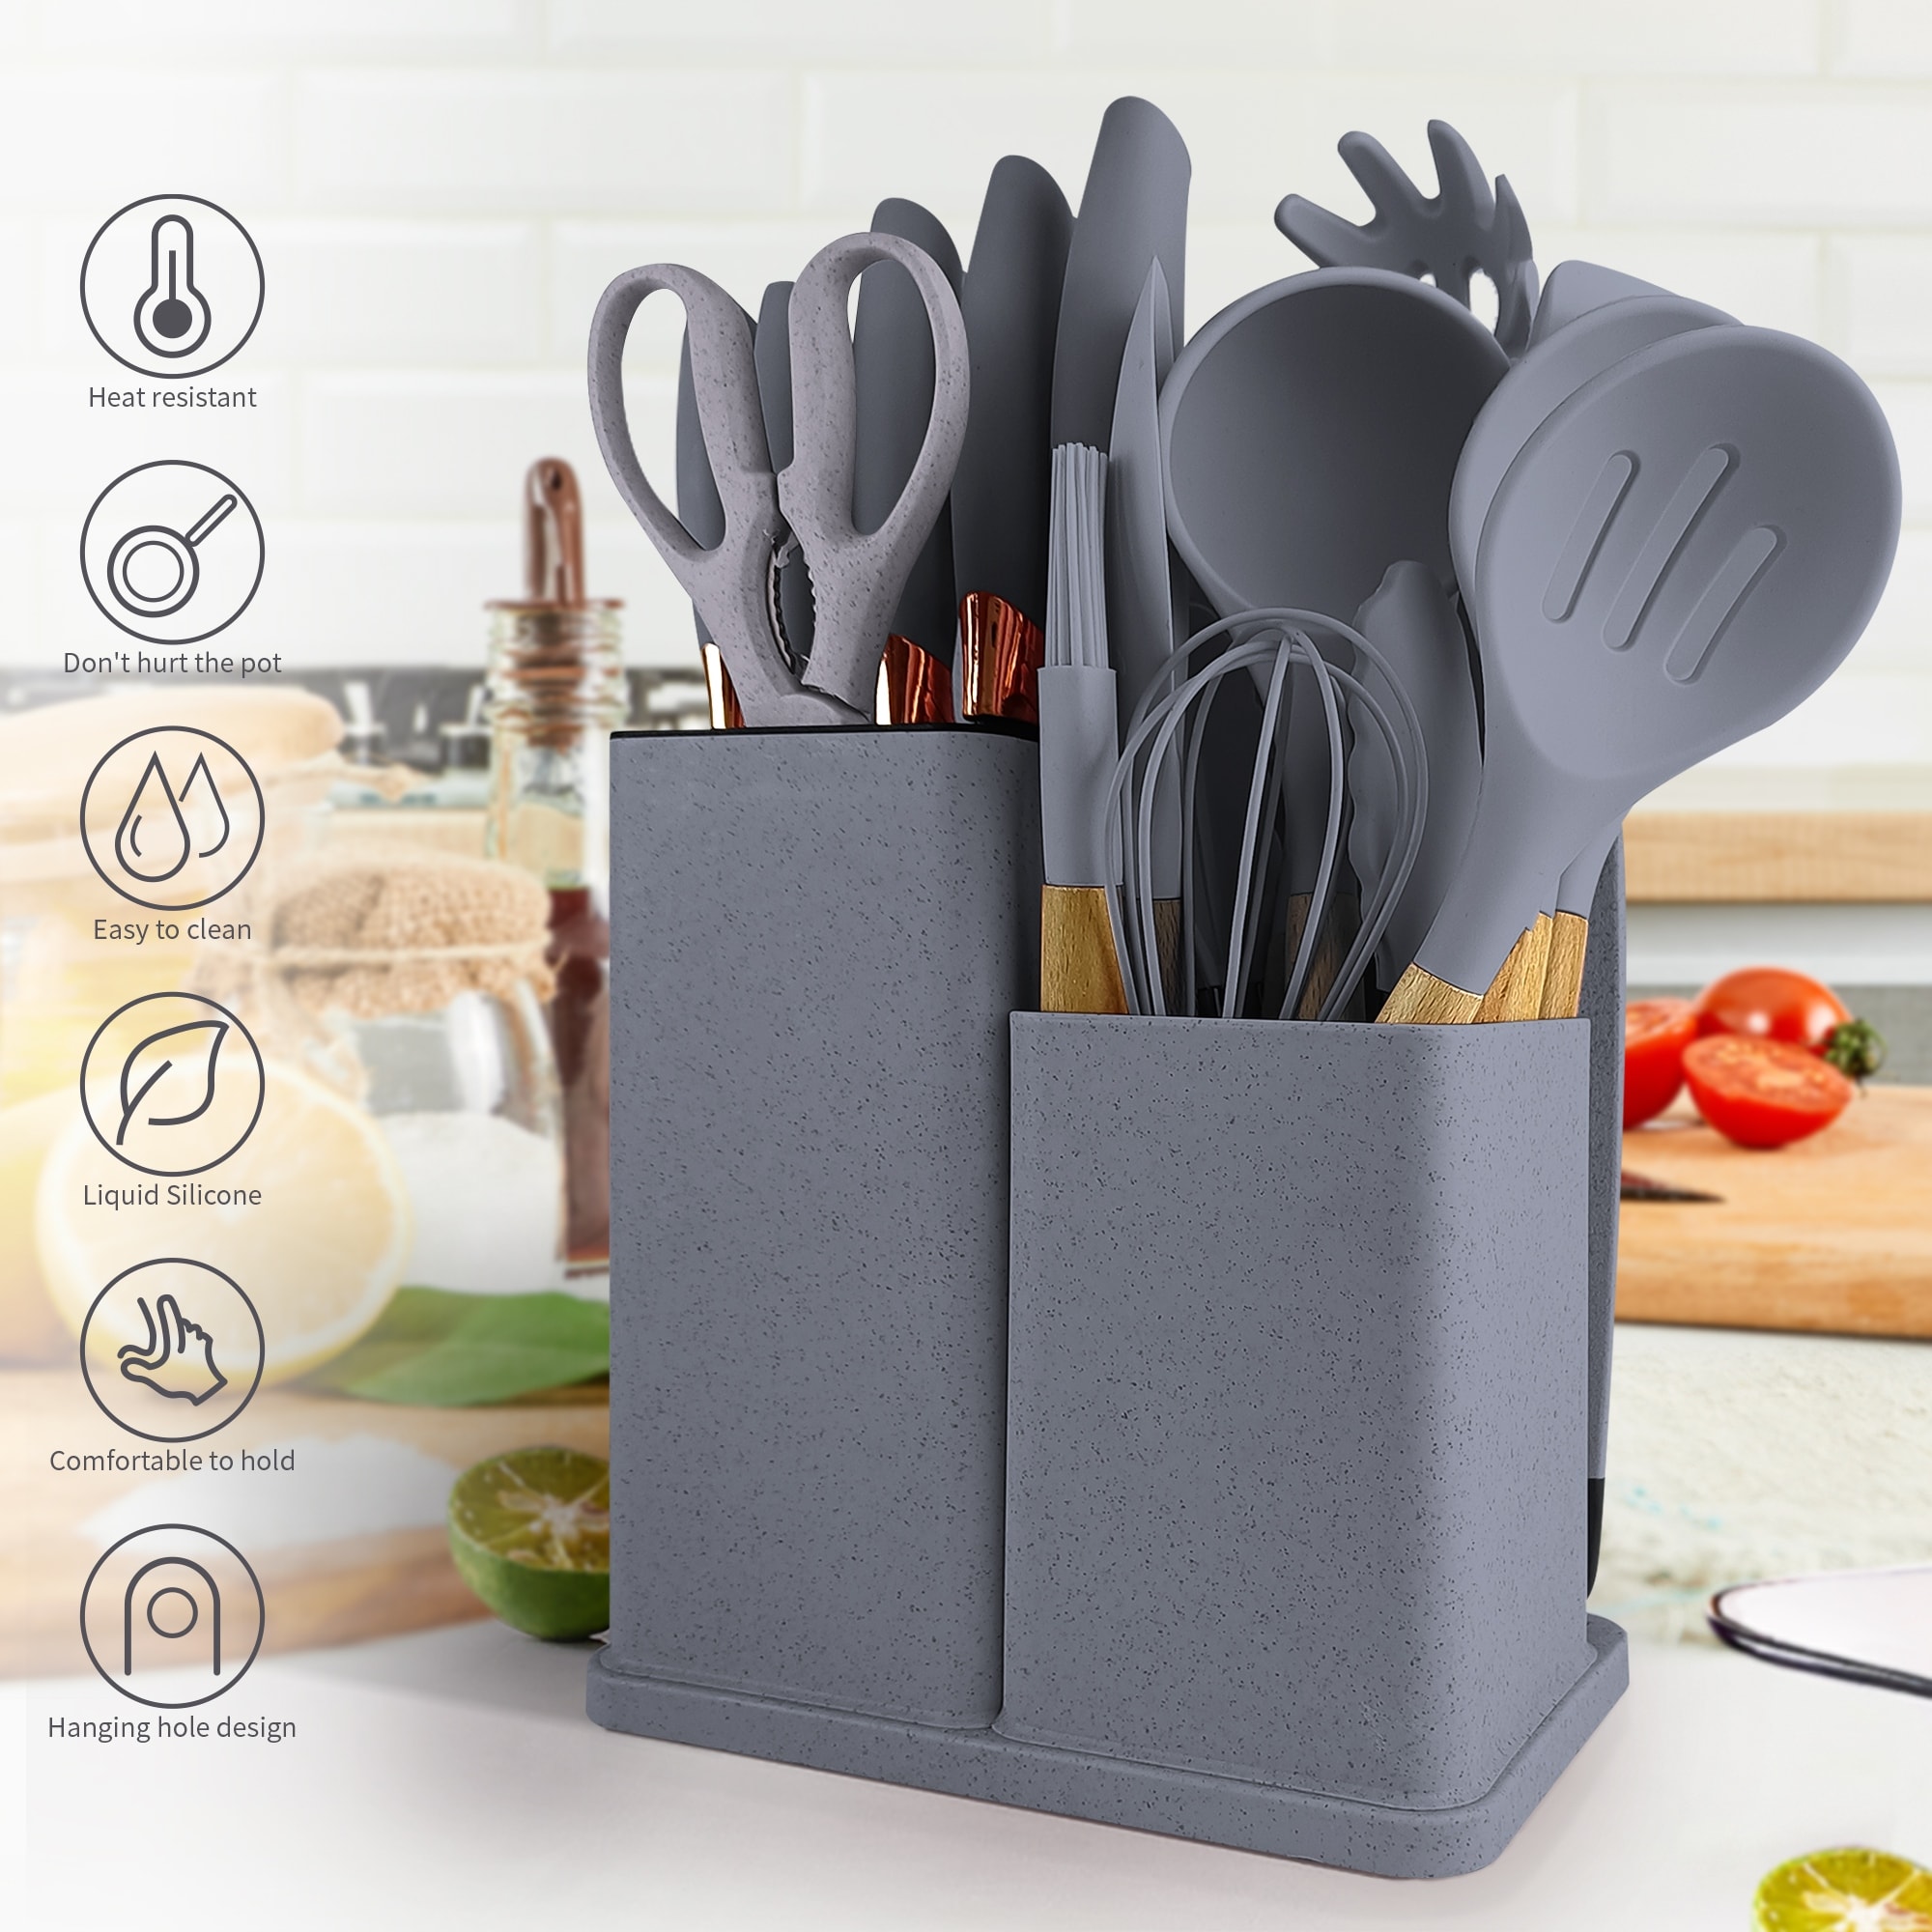 https://ak1.ostkcdn.com/images/products/is/images/direct/3799dbb76946bae38a3904d6ac46b5c0aa14bf08/19-piece-Non-stick-Silicone-Assorted-Kitchen-Utensil-Set.jpg